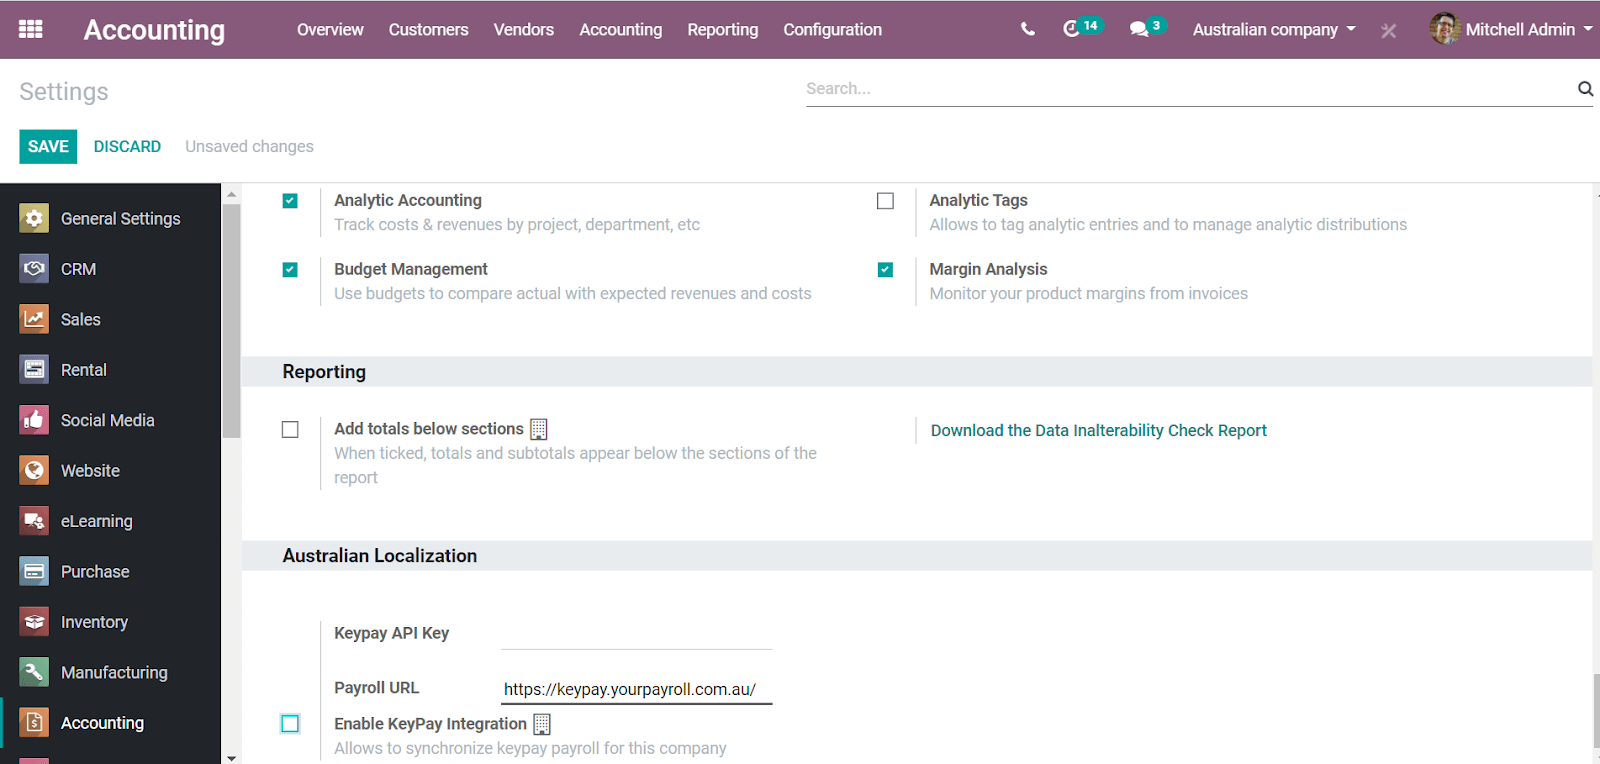 Odoo Accounting settings includes a section for the Australian Loclization